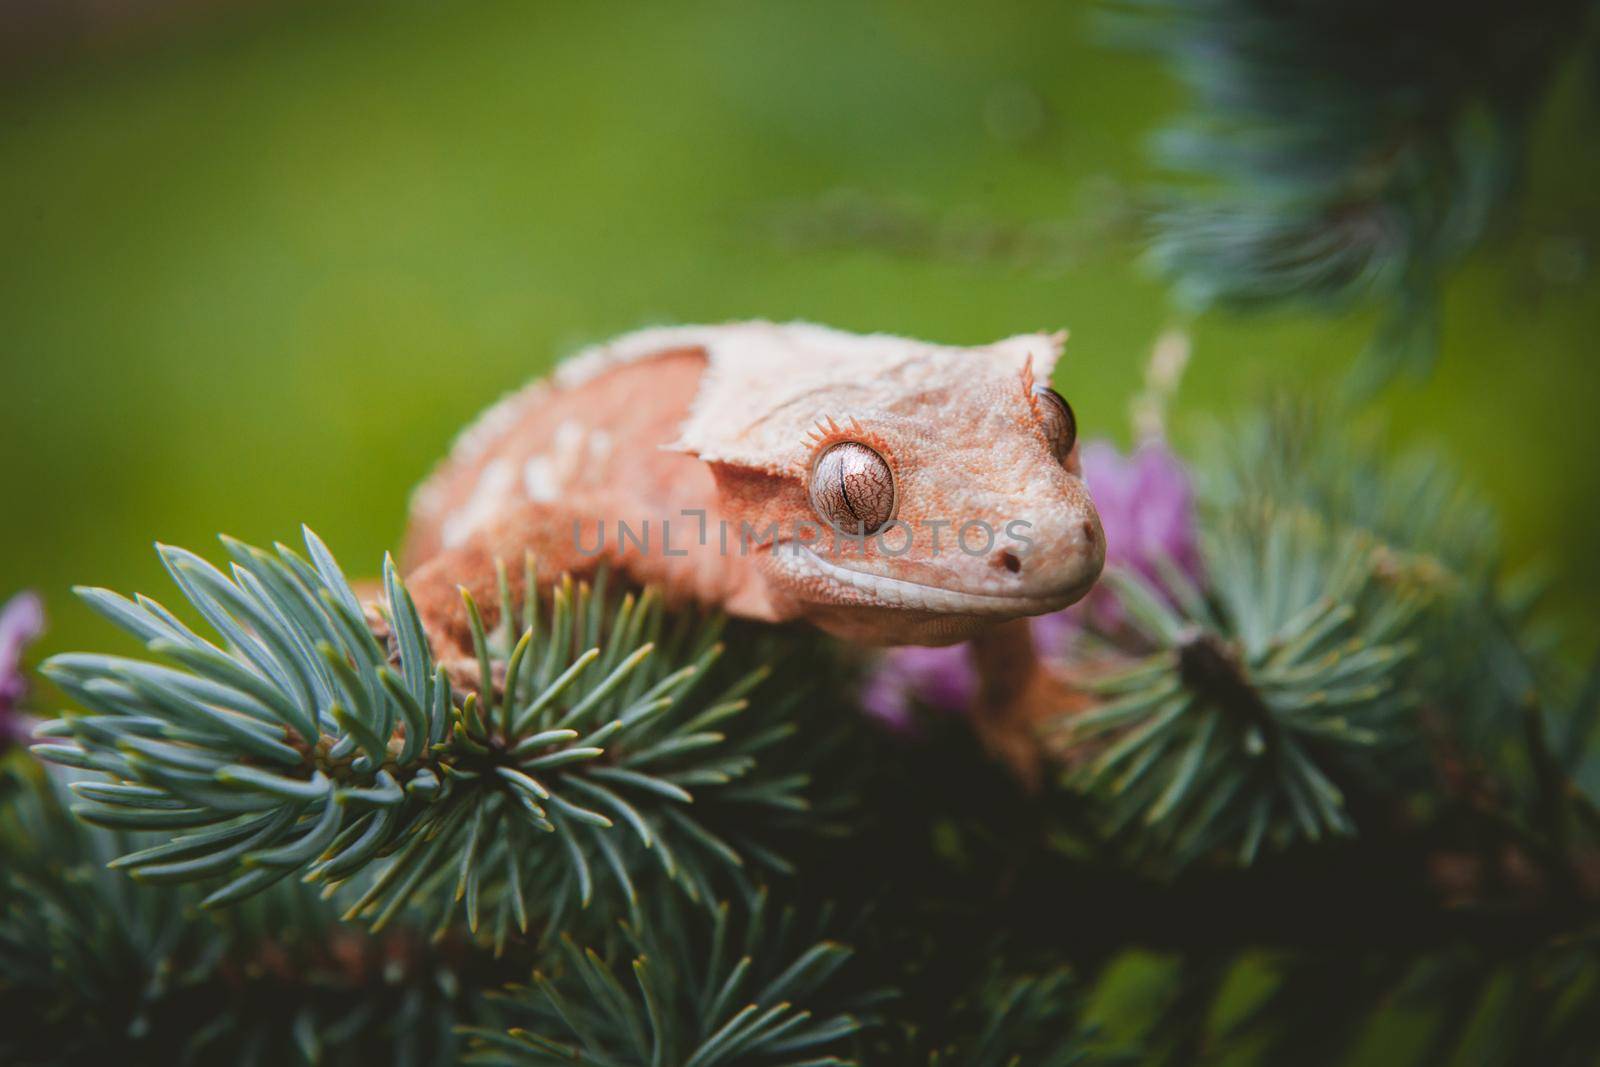 New Caledonian crested gecko on tree with flowers by RosaJay